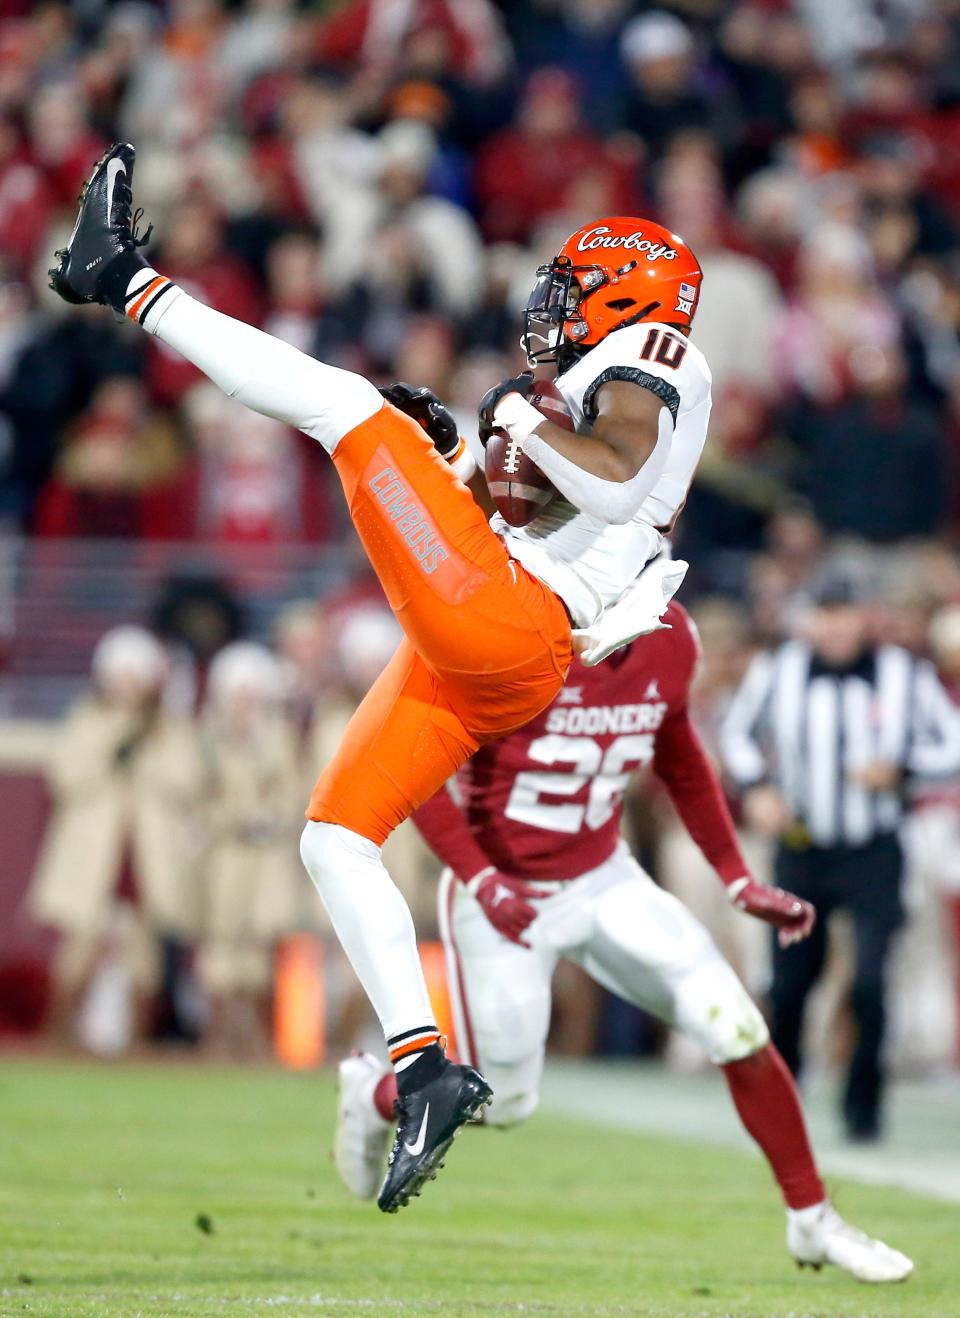 OSU receiver Rashod Owens (10) catches a pass in front of OU linebacker Danny Stutsman (28) during last season's Bedlam football game in Norman.